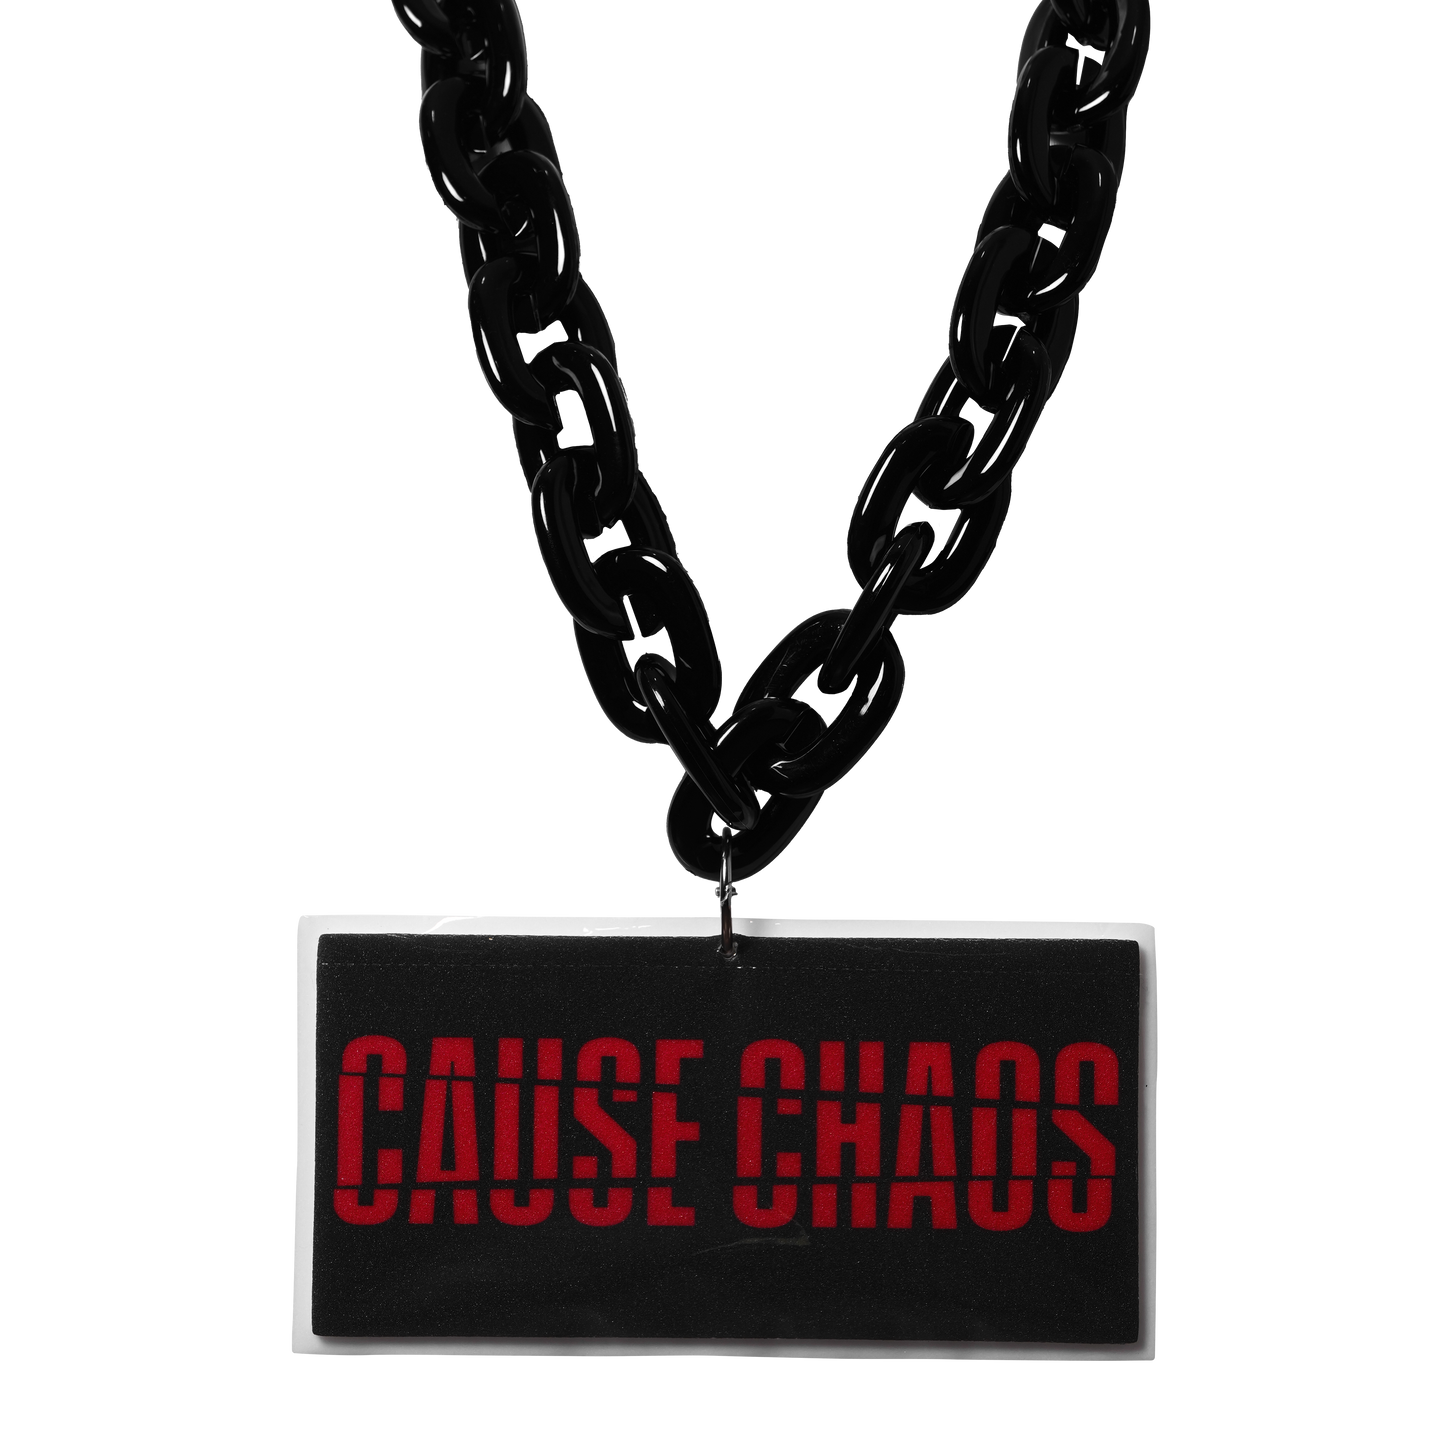 Fan Fave Cause Chaos Chain